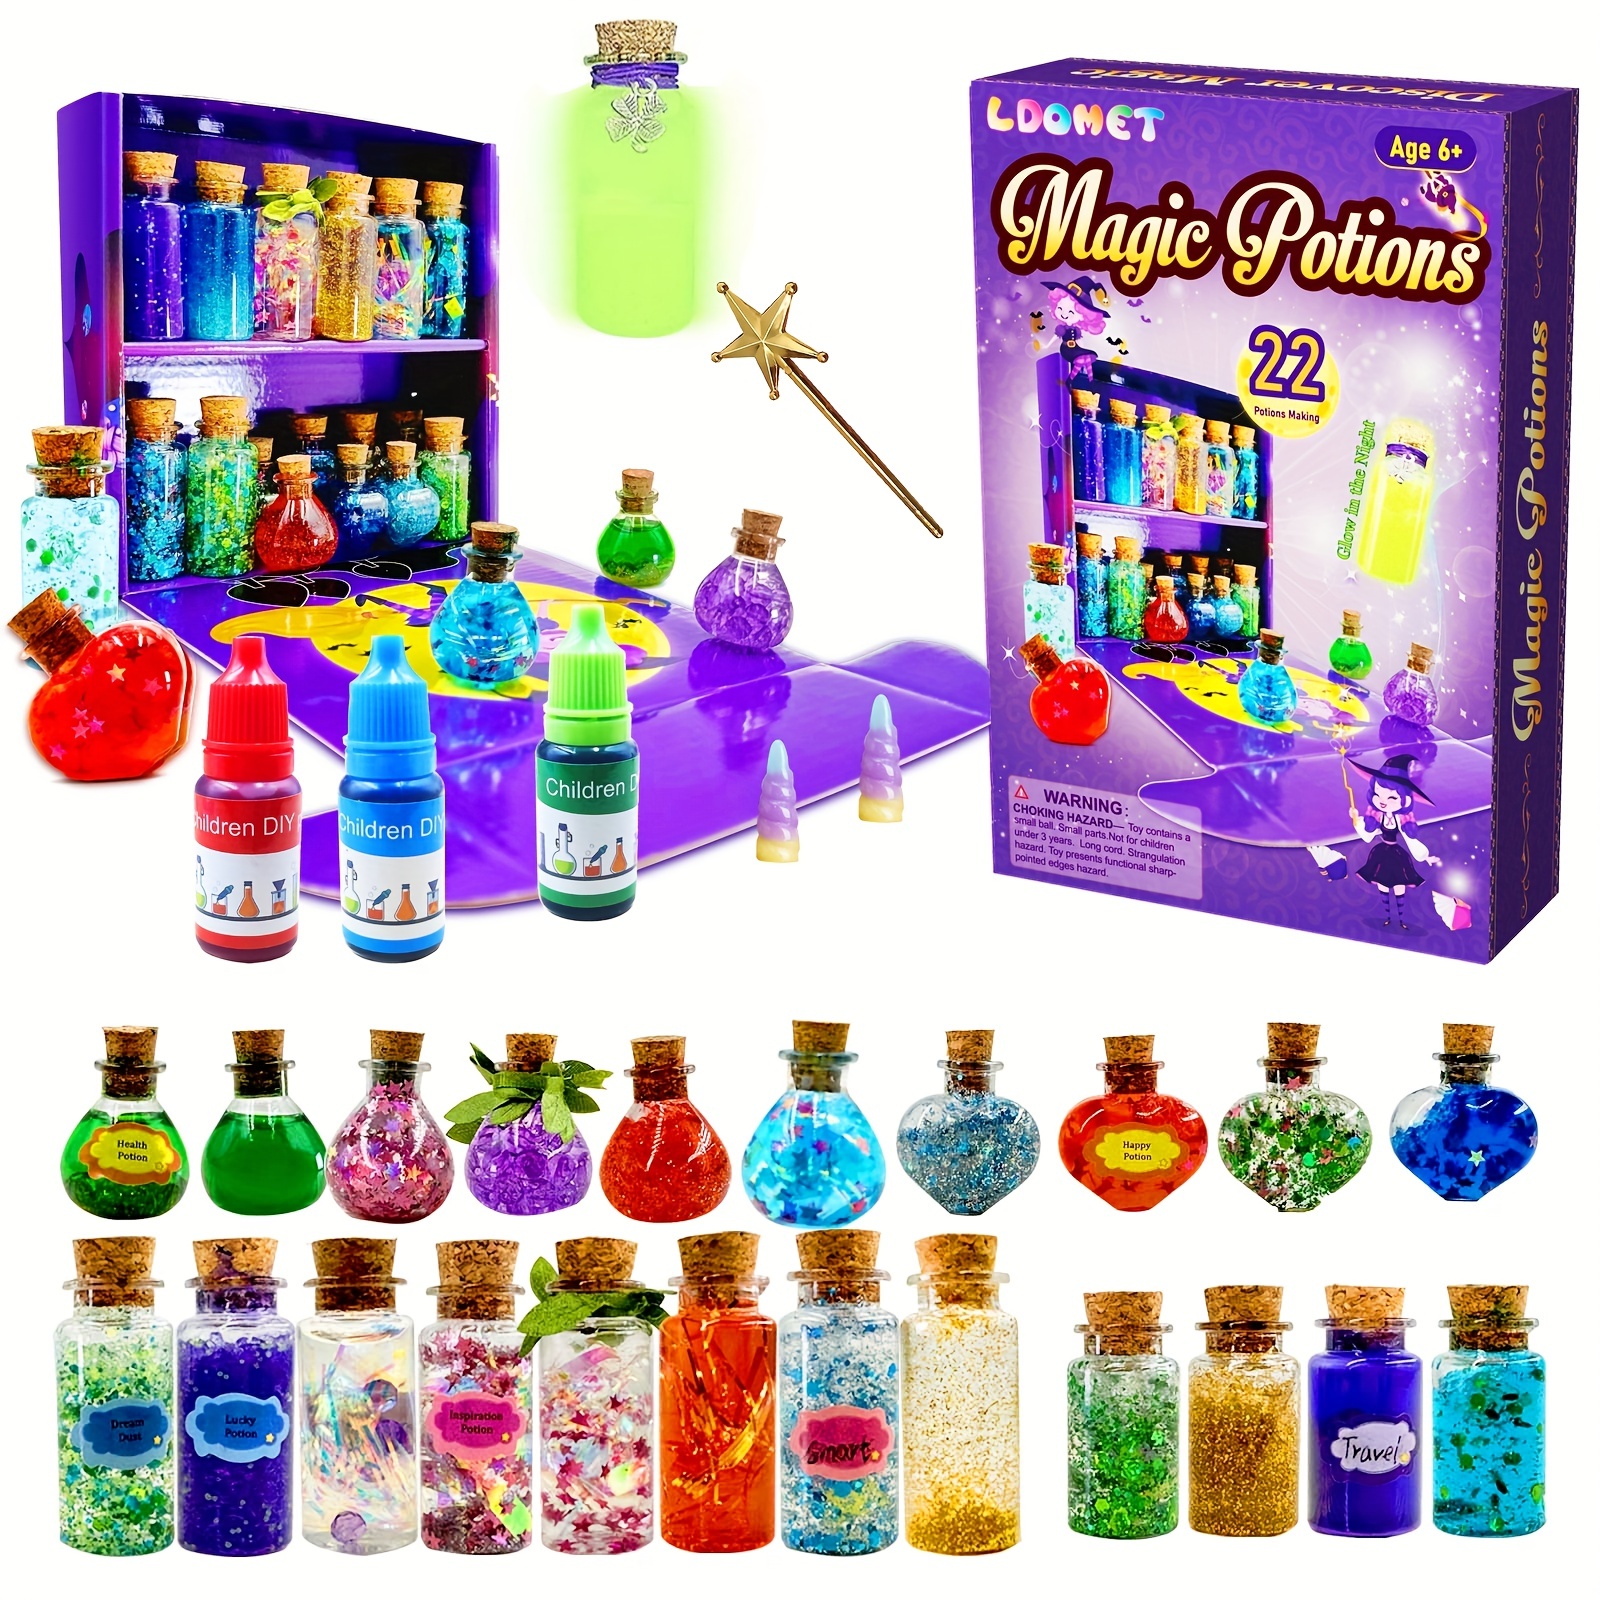 Craft-tastic Fairy Potion Kit - DIY Fairy Potions - Ages 6+